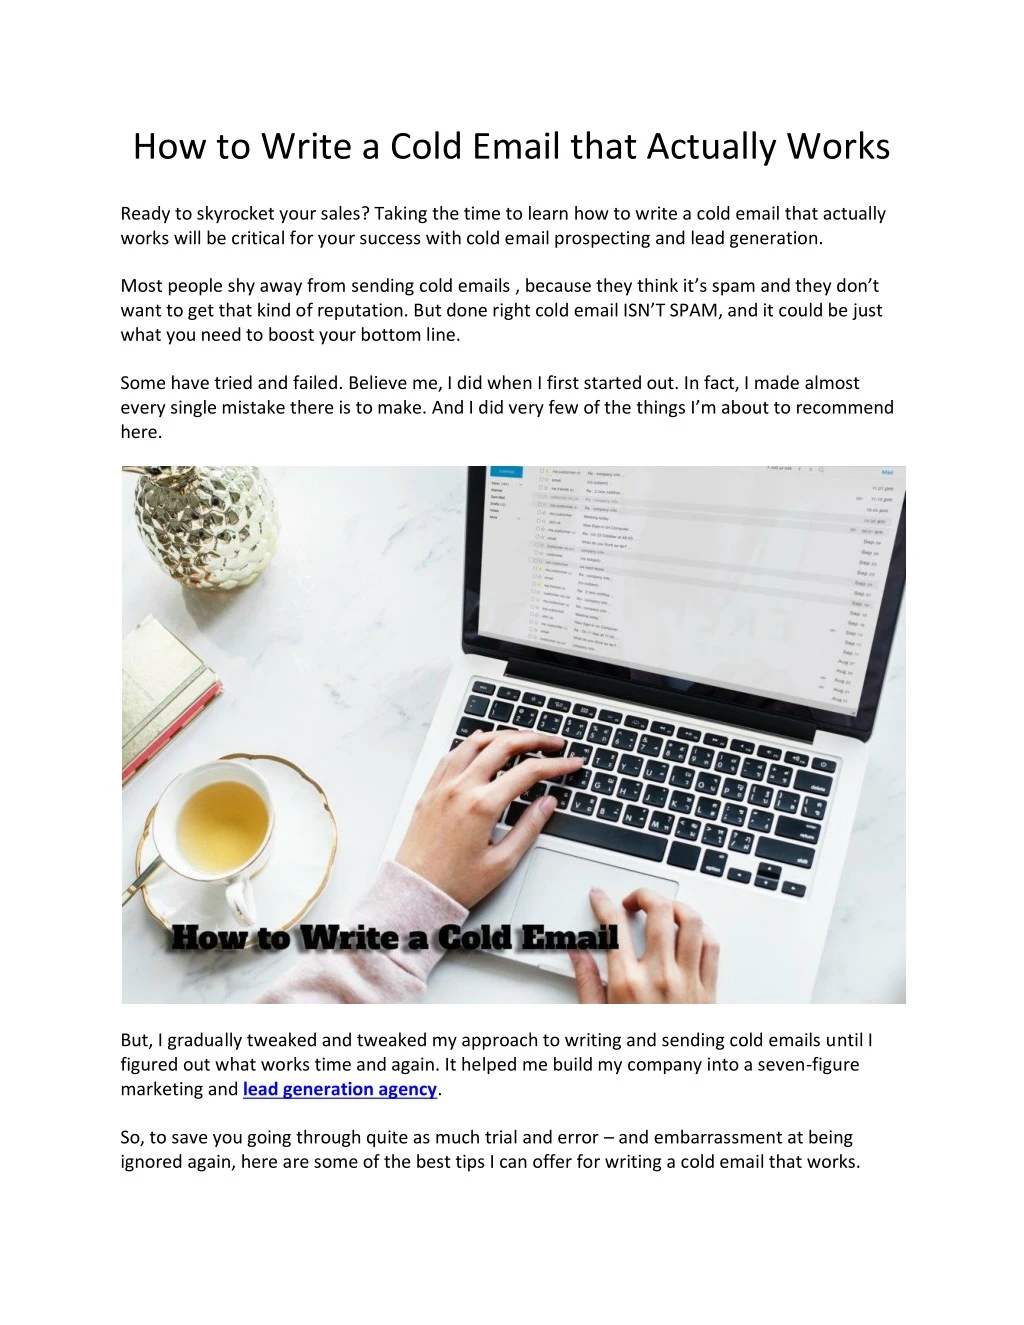 how to write a cold email that actually works